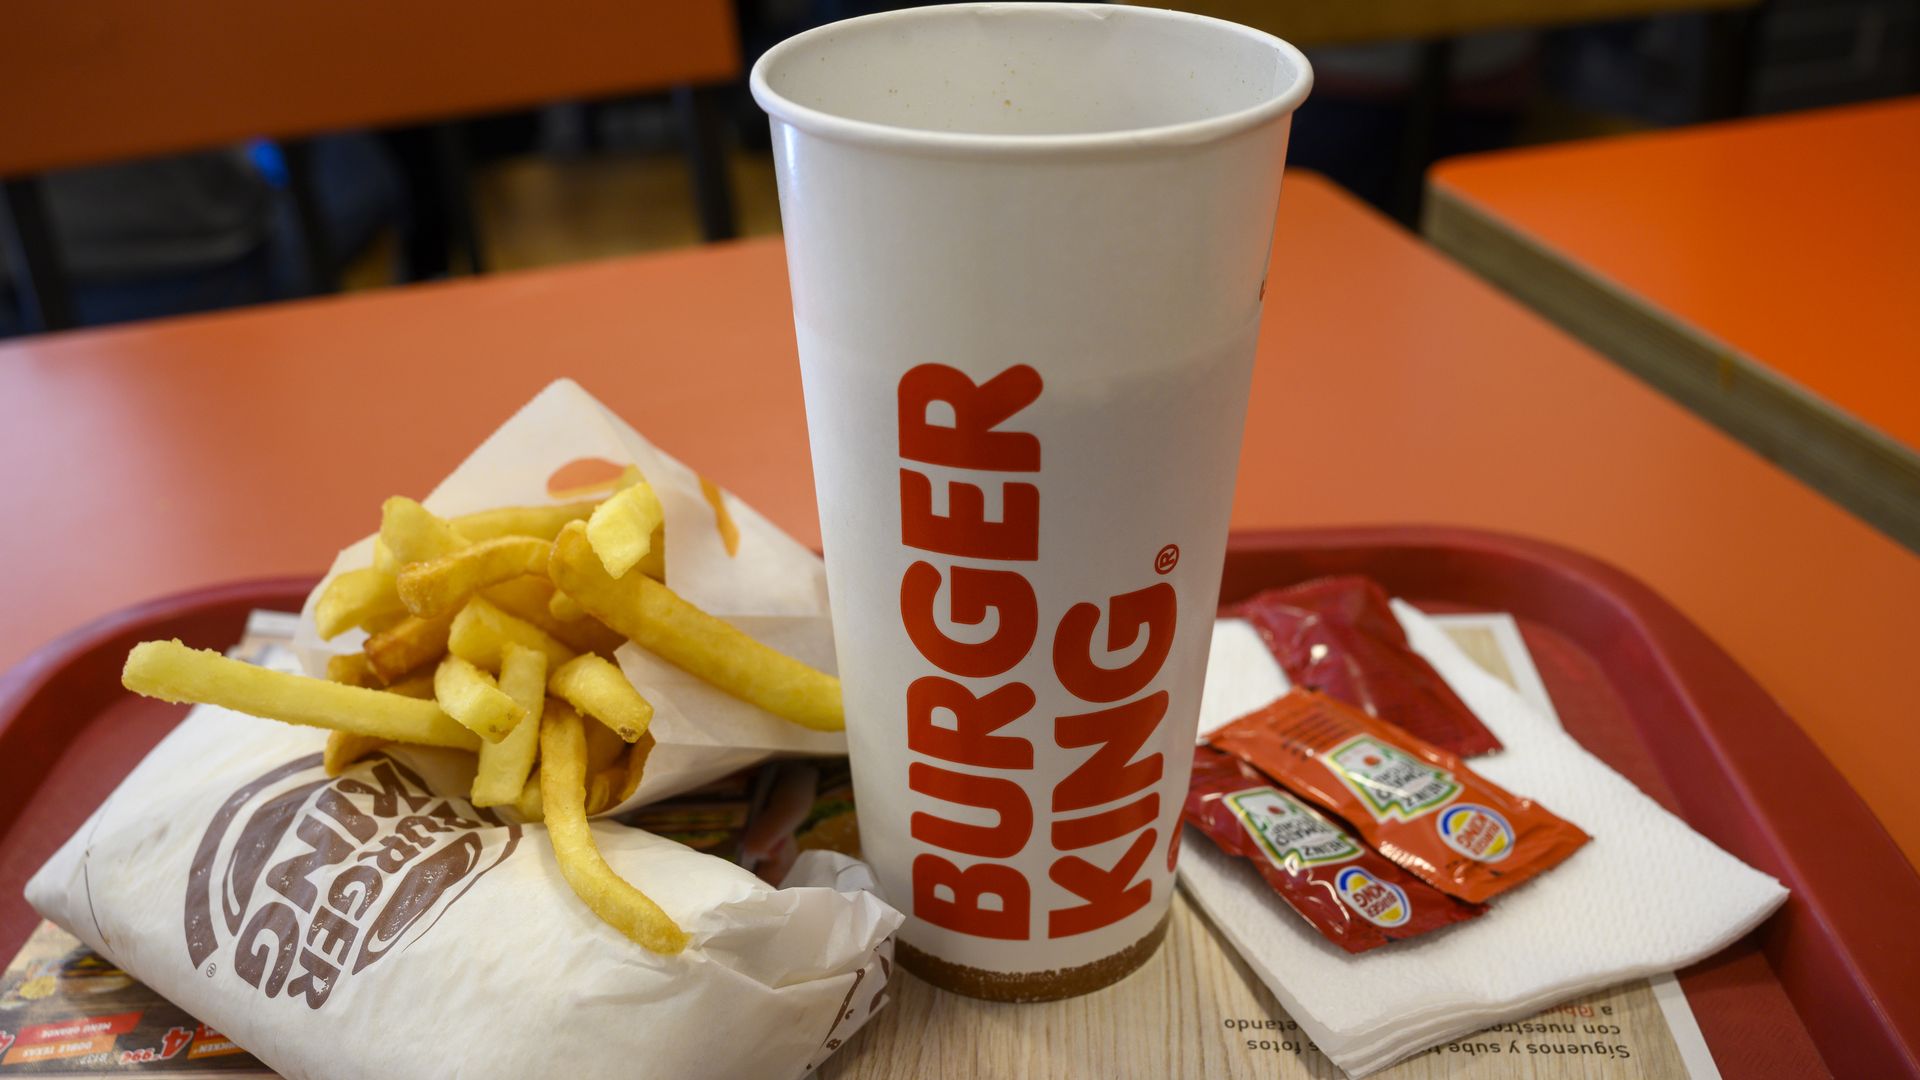 A Burger King meal on a tray.